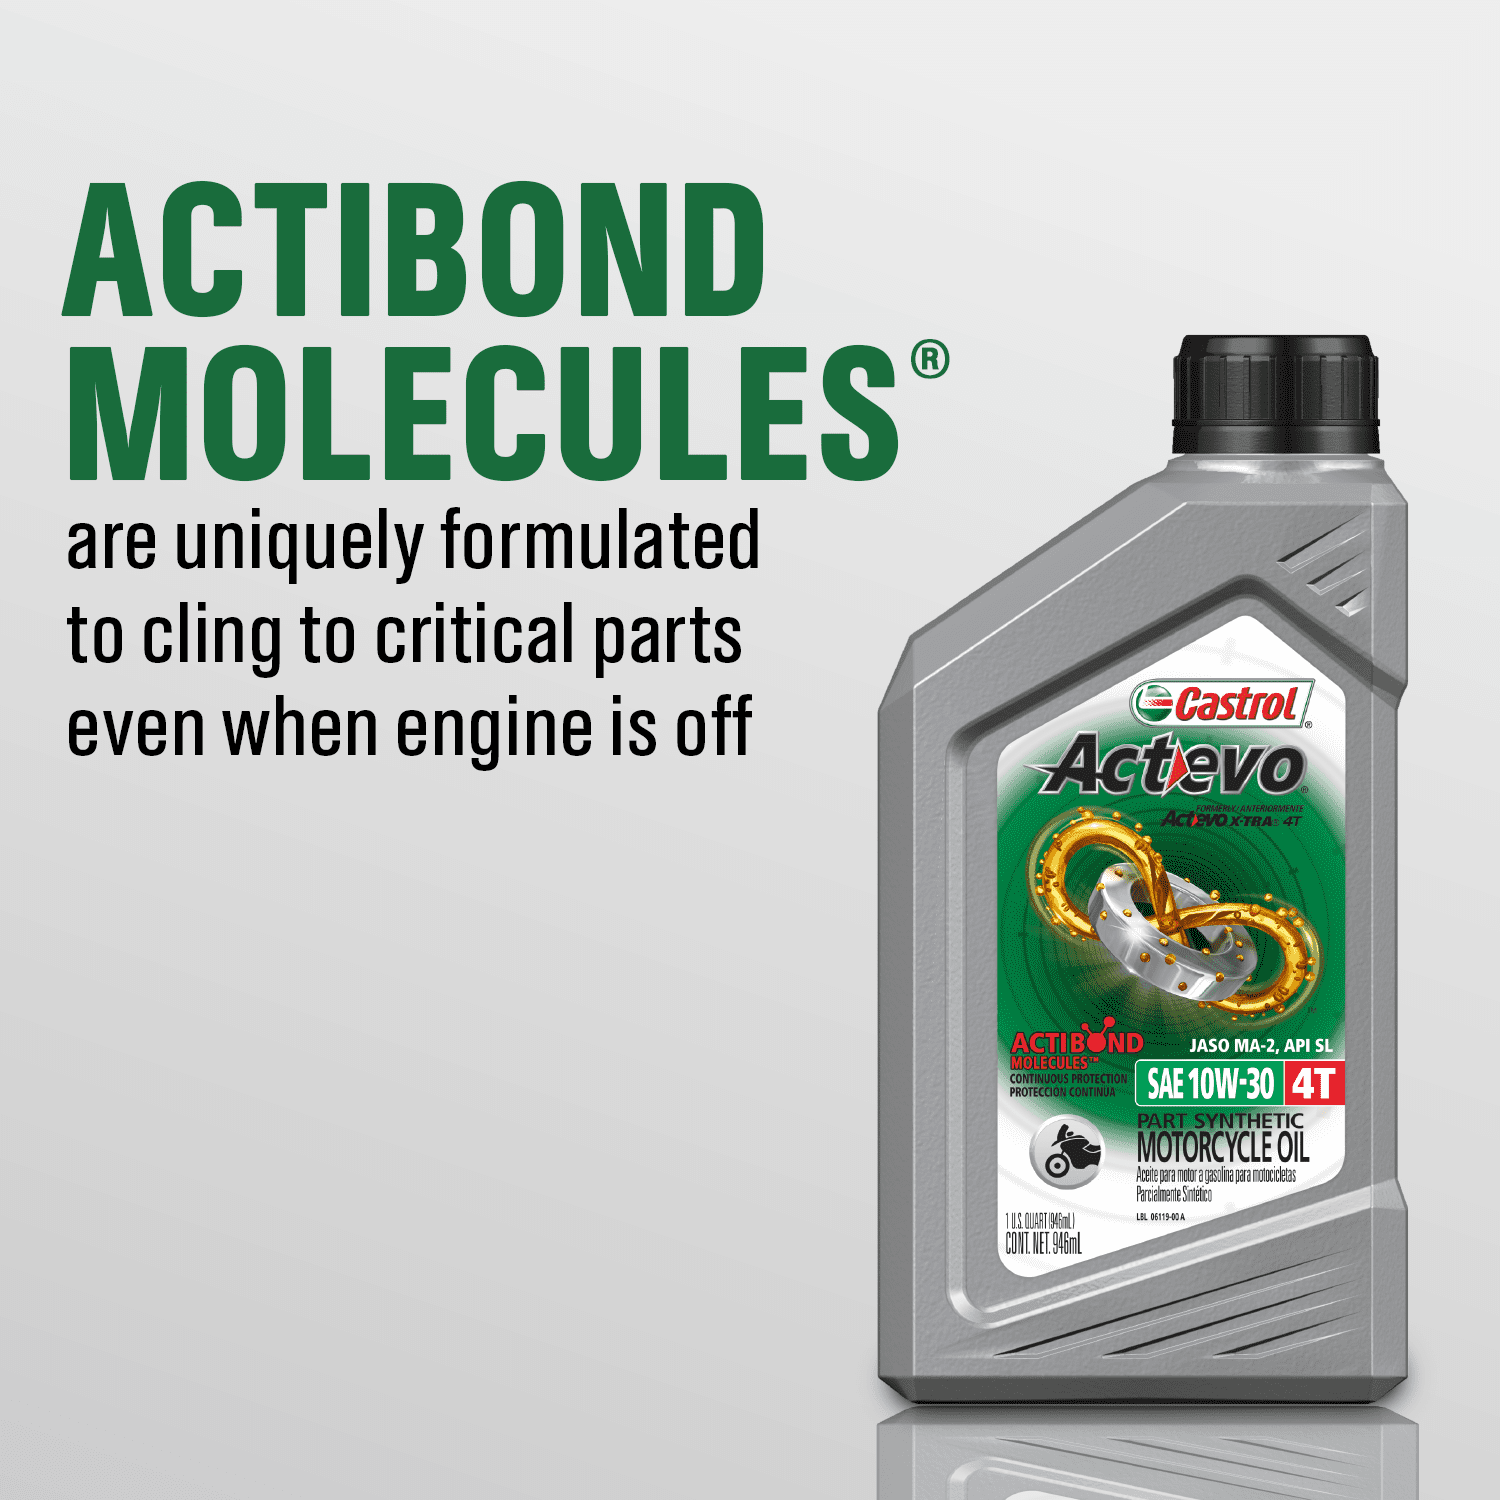 Castrol Actevo 4T 10W-40 Part Synthetic Motorcycle Oil, 1 Gallon - 2